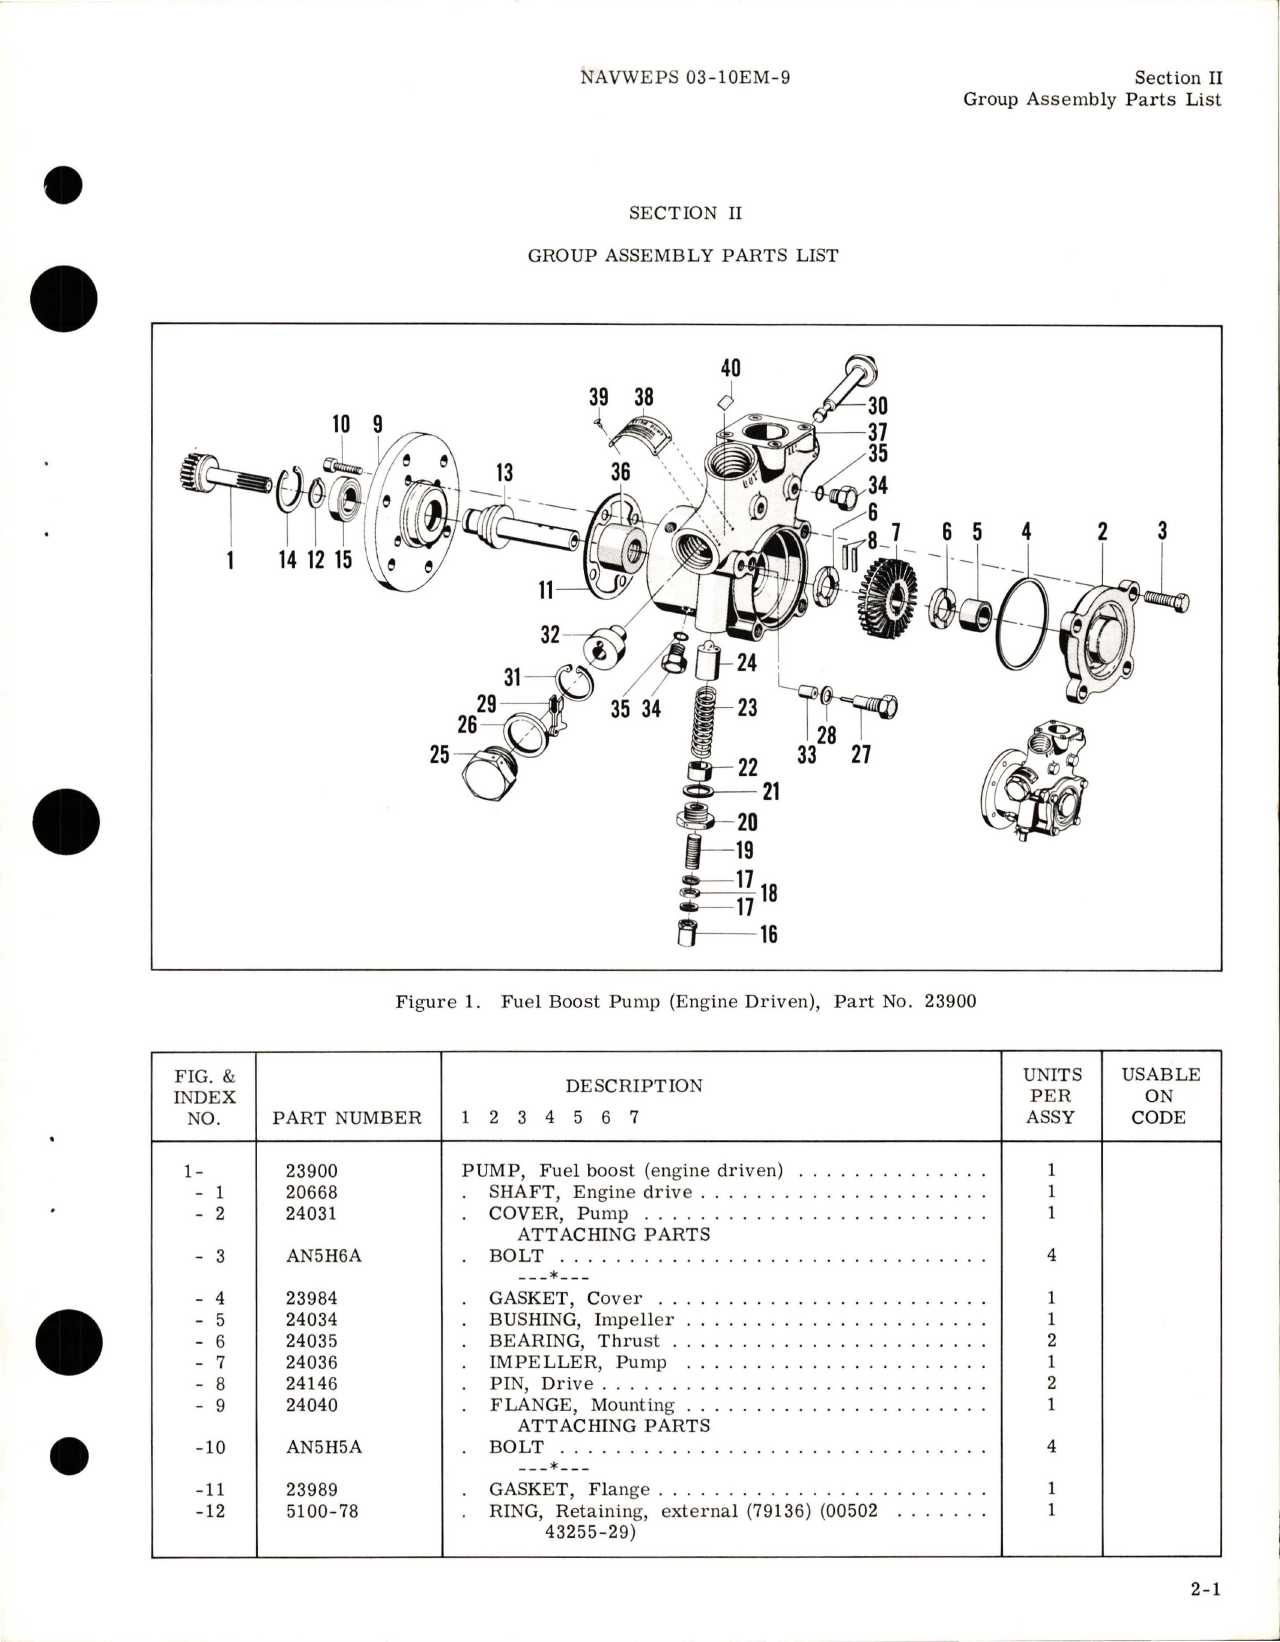 Sample page 7 from AirCorps Library document: Illustrated Parts Breakdown for Engine Driven Fuel Boost Pump - Parts 23900 and 50138